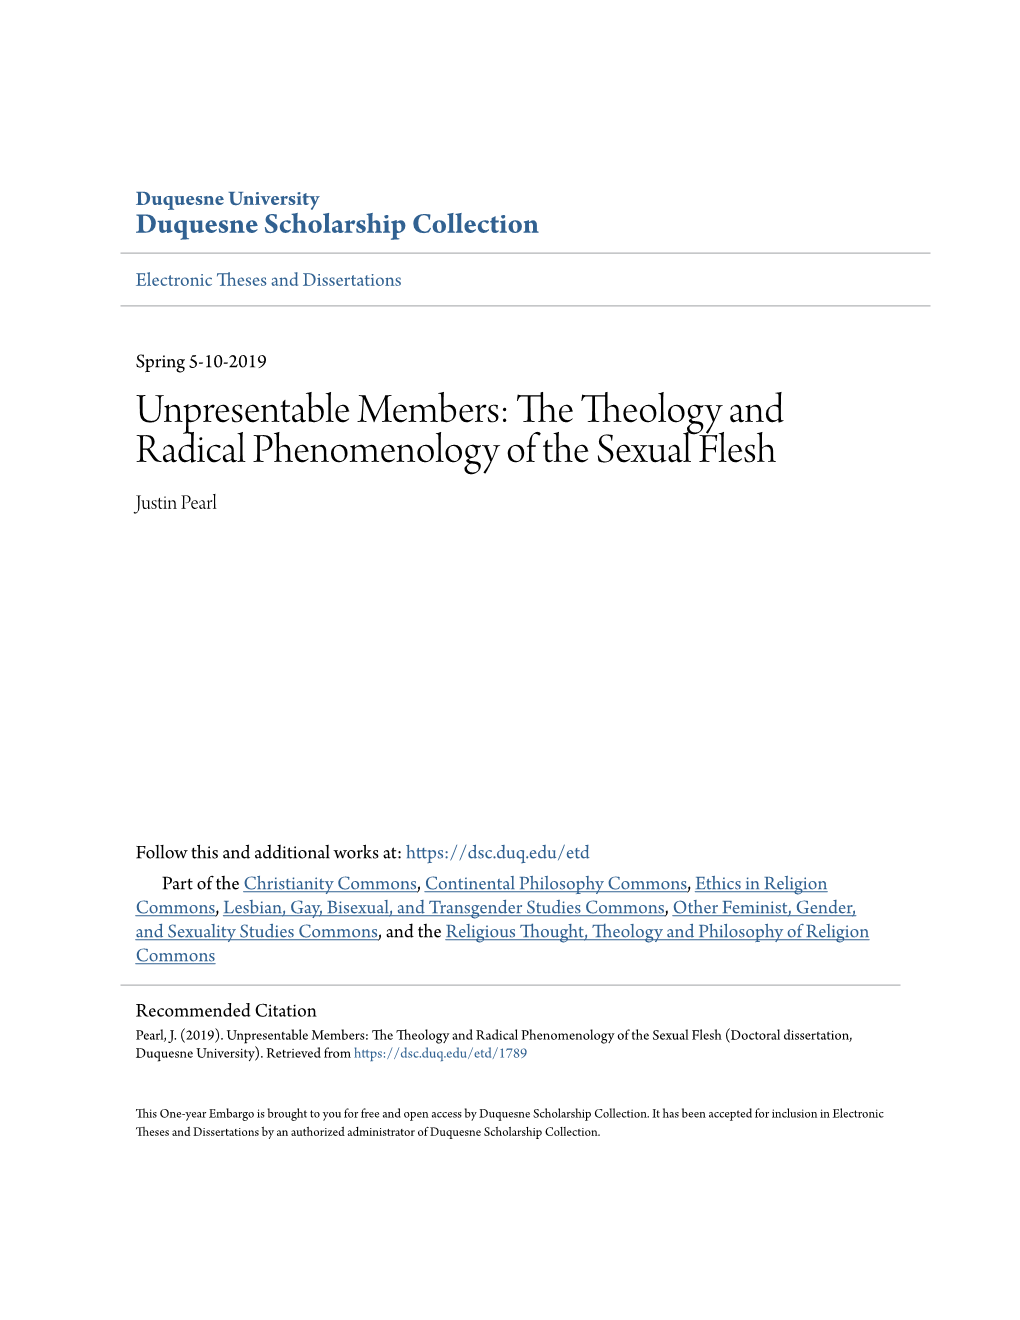 The Theology and Radical Phenomenology of the Sexual Flesh Justin Pearl